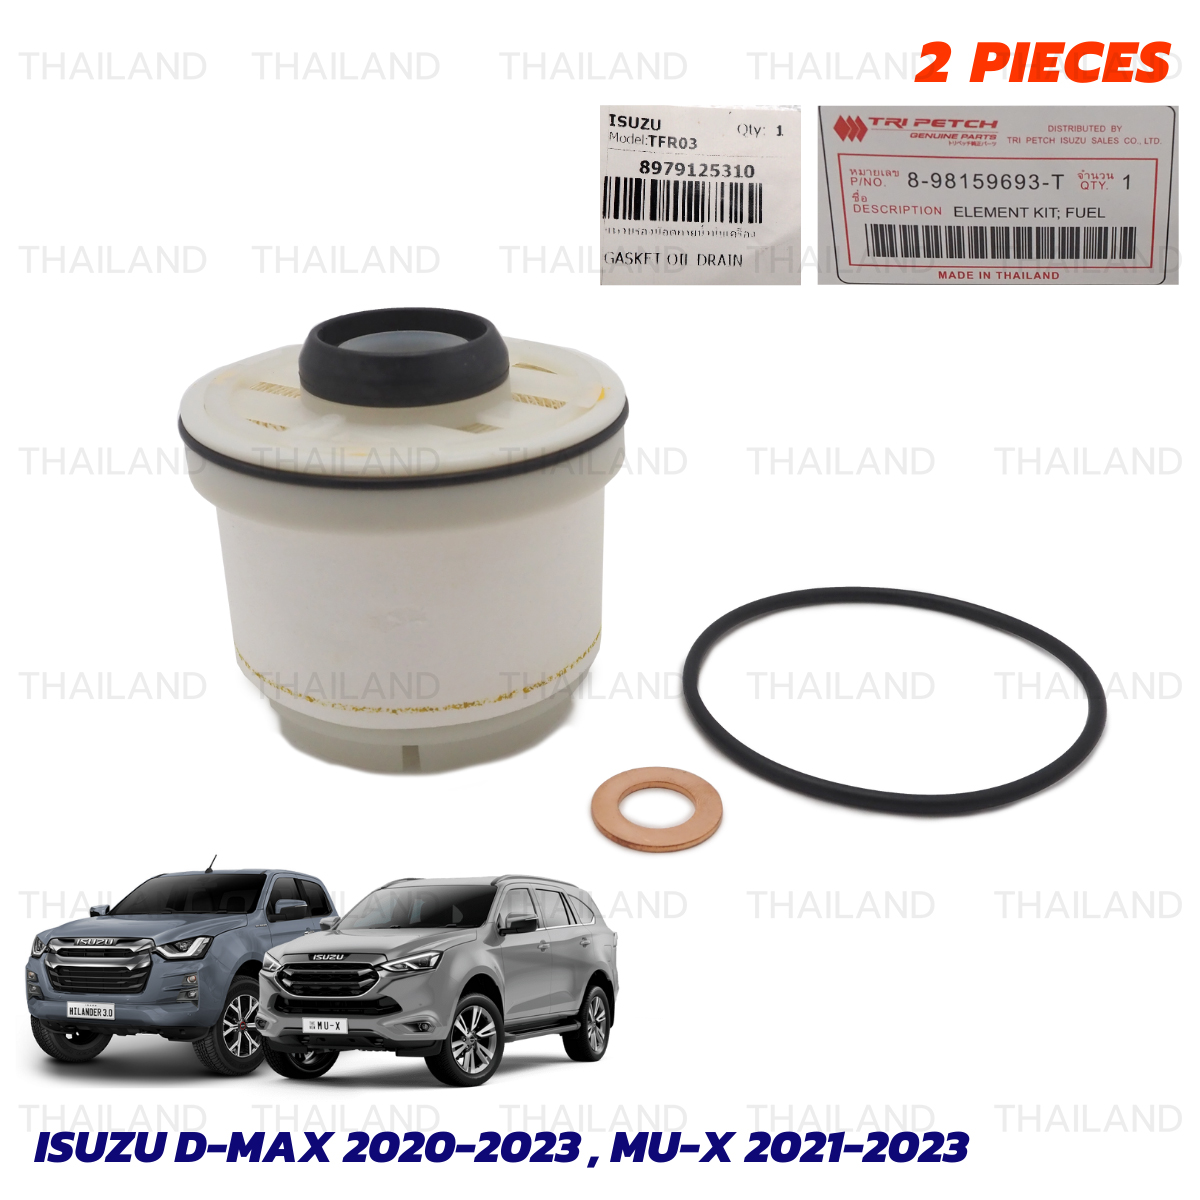 Auto Car Spare Parts Paper Diesel Filter for Dmax 8-98159693-0 - China Diesel  Filter, Auto Diesel Filter